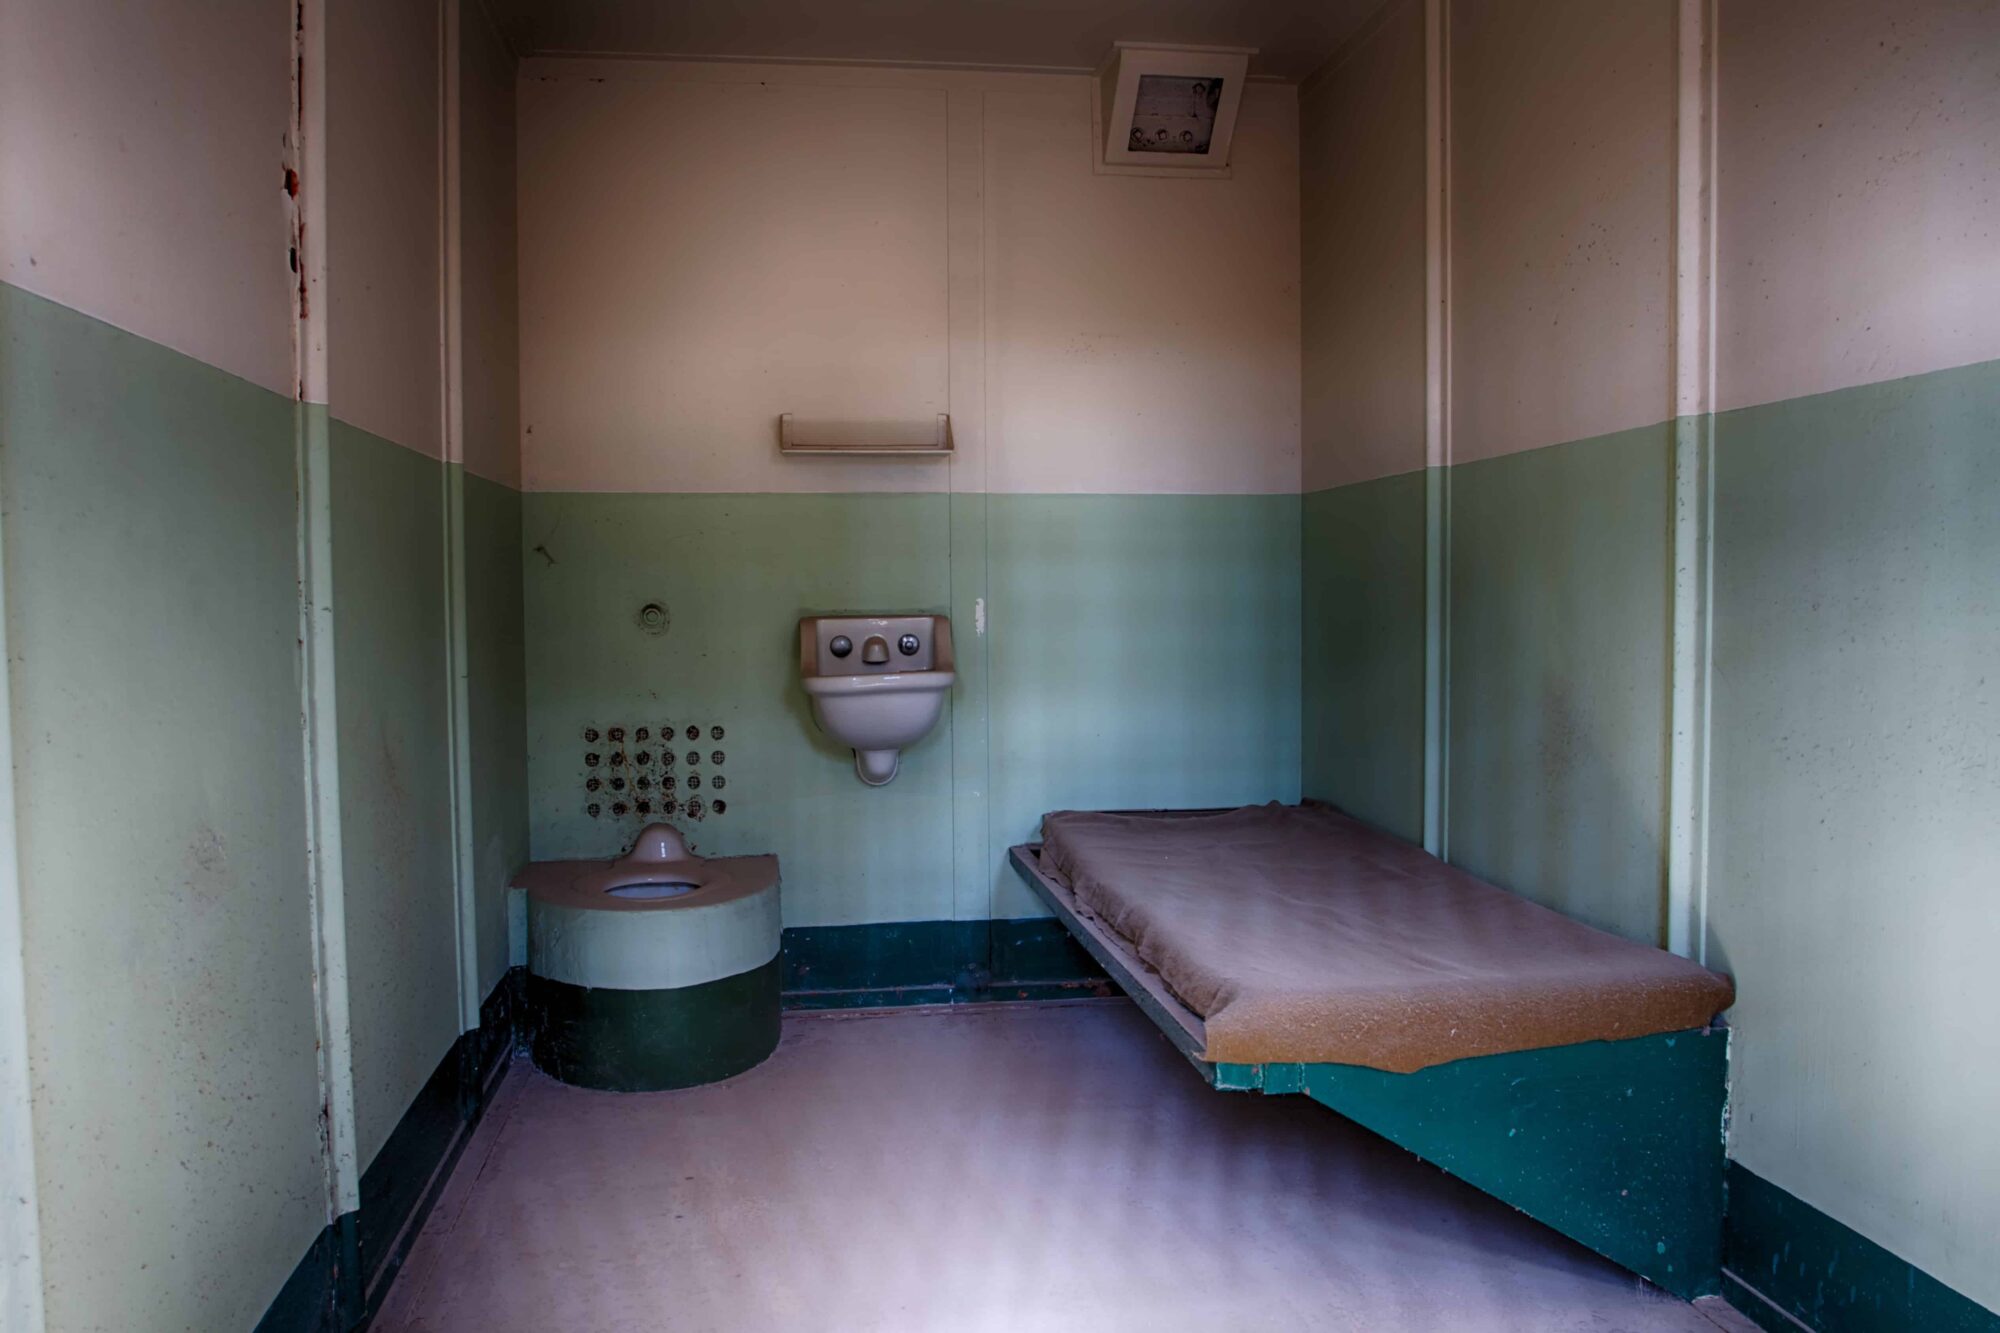 Solitary Confinement cell